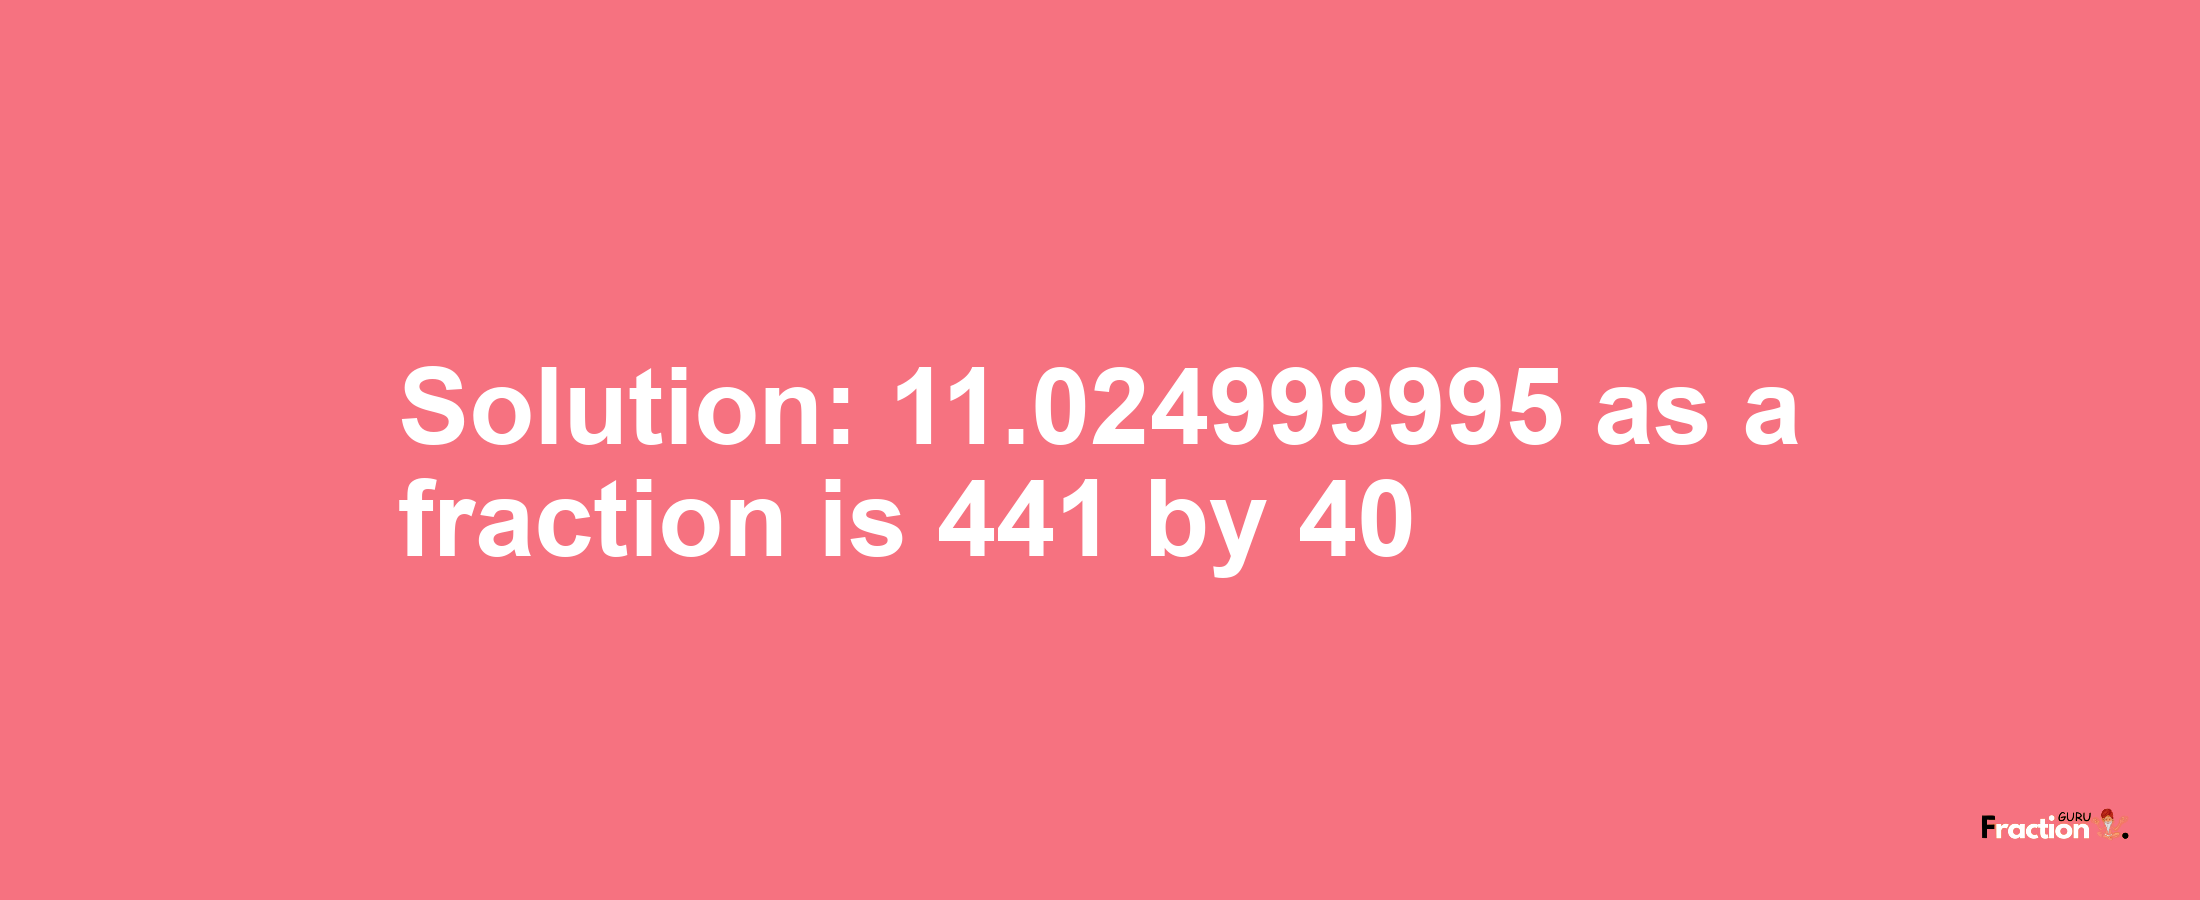 Solution:11.024999995 as a fraction is 441/40